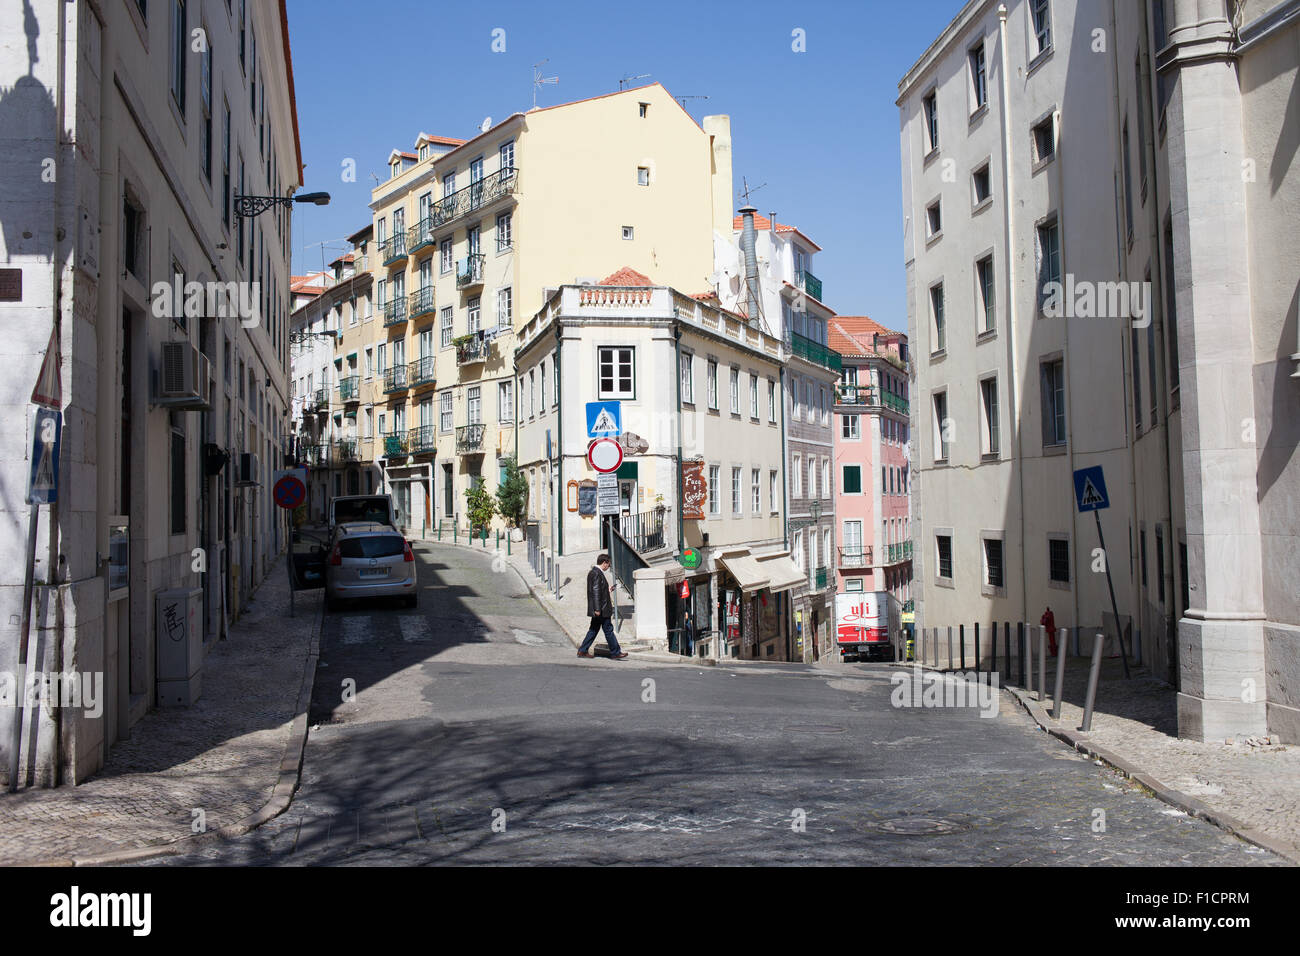 Houses in the Bairro Alto district in Lisbon, Portugal. Stock Photo